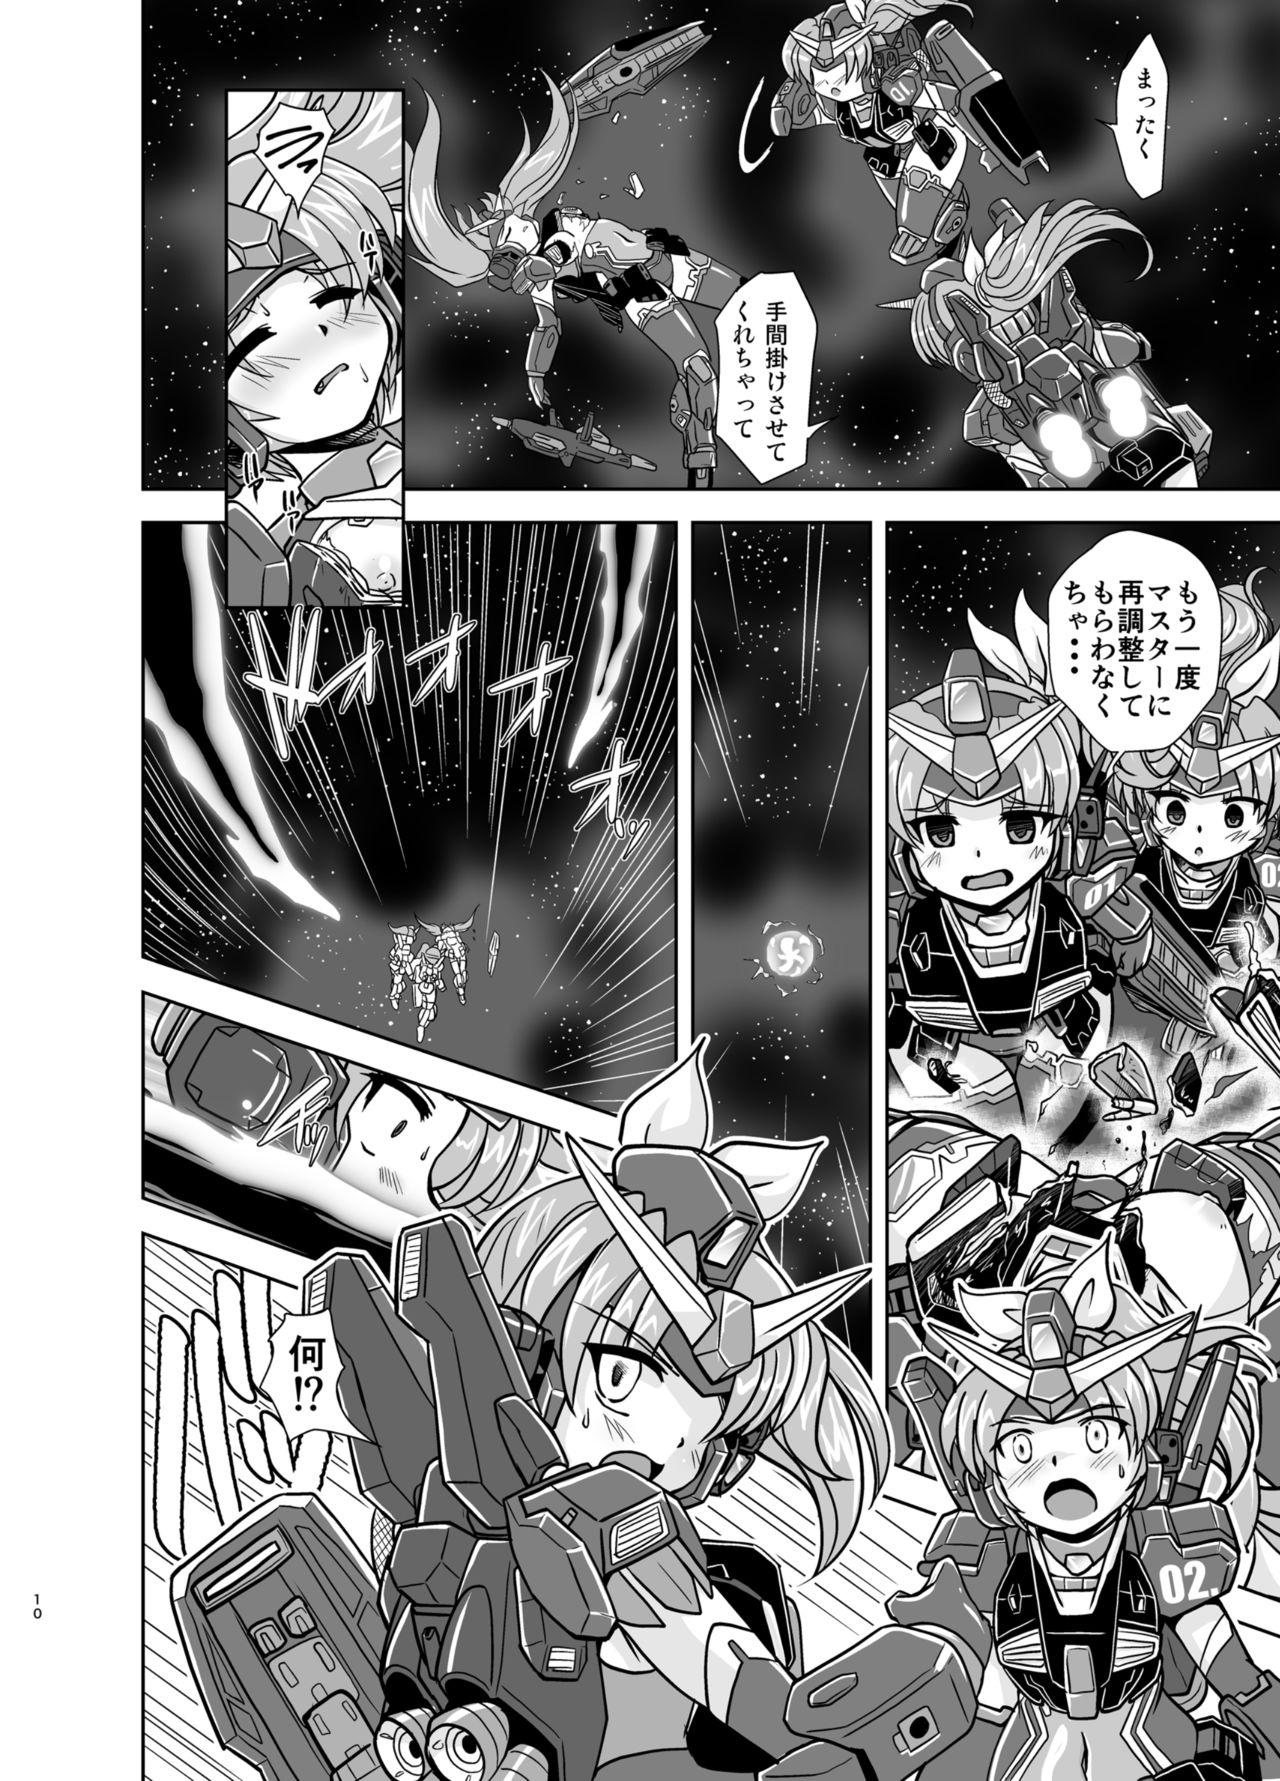 Gay Cut GH - Mobile suit gundam Barely 18 Porn - Page 10